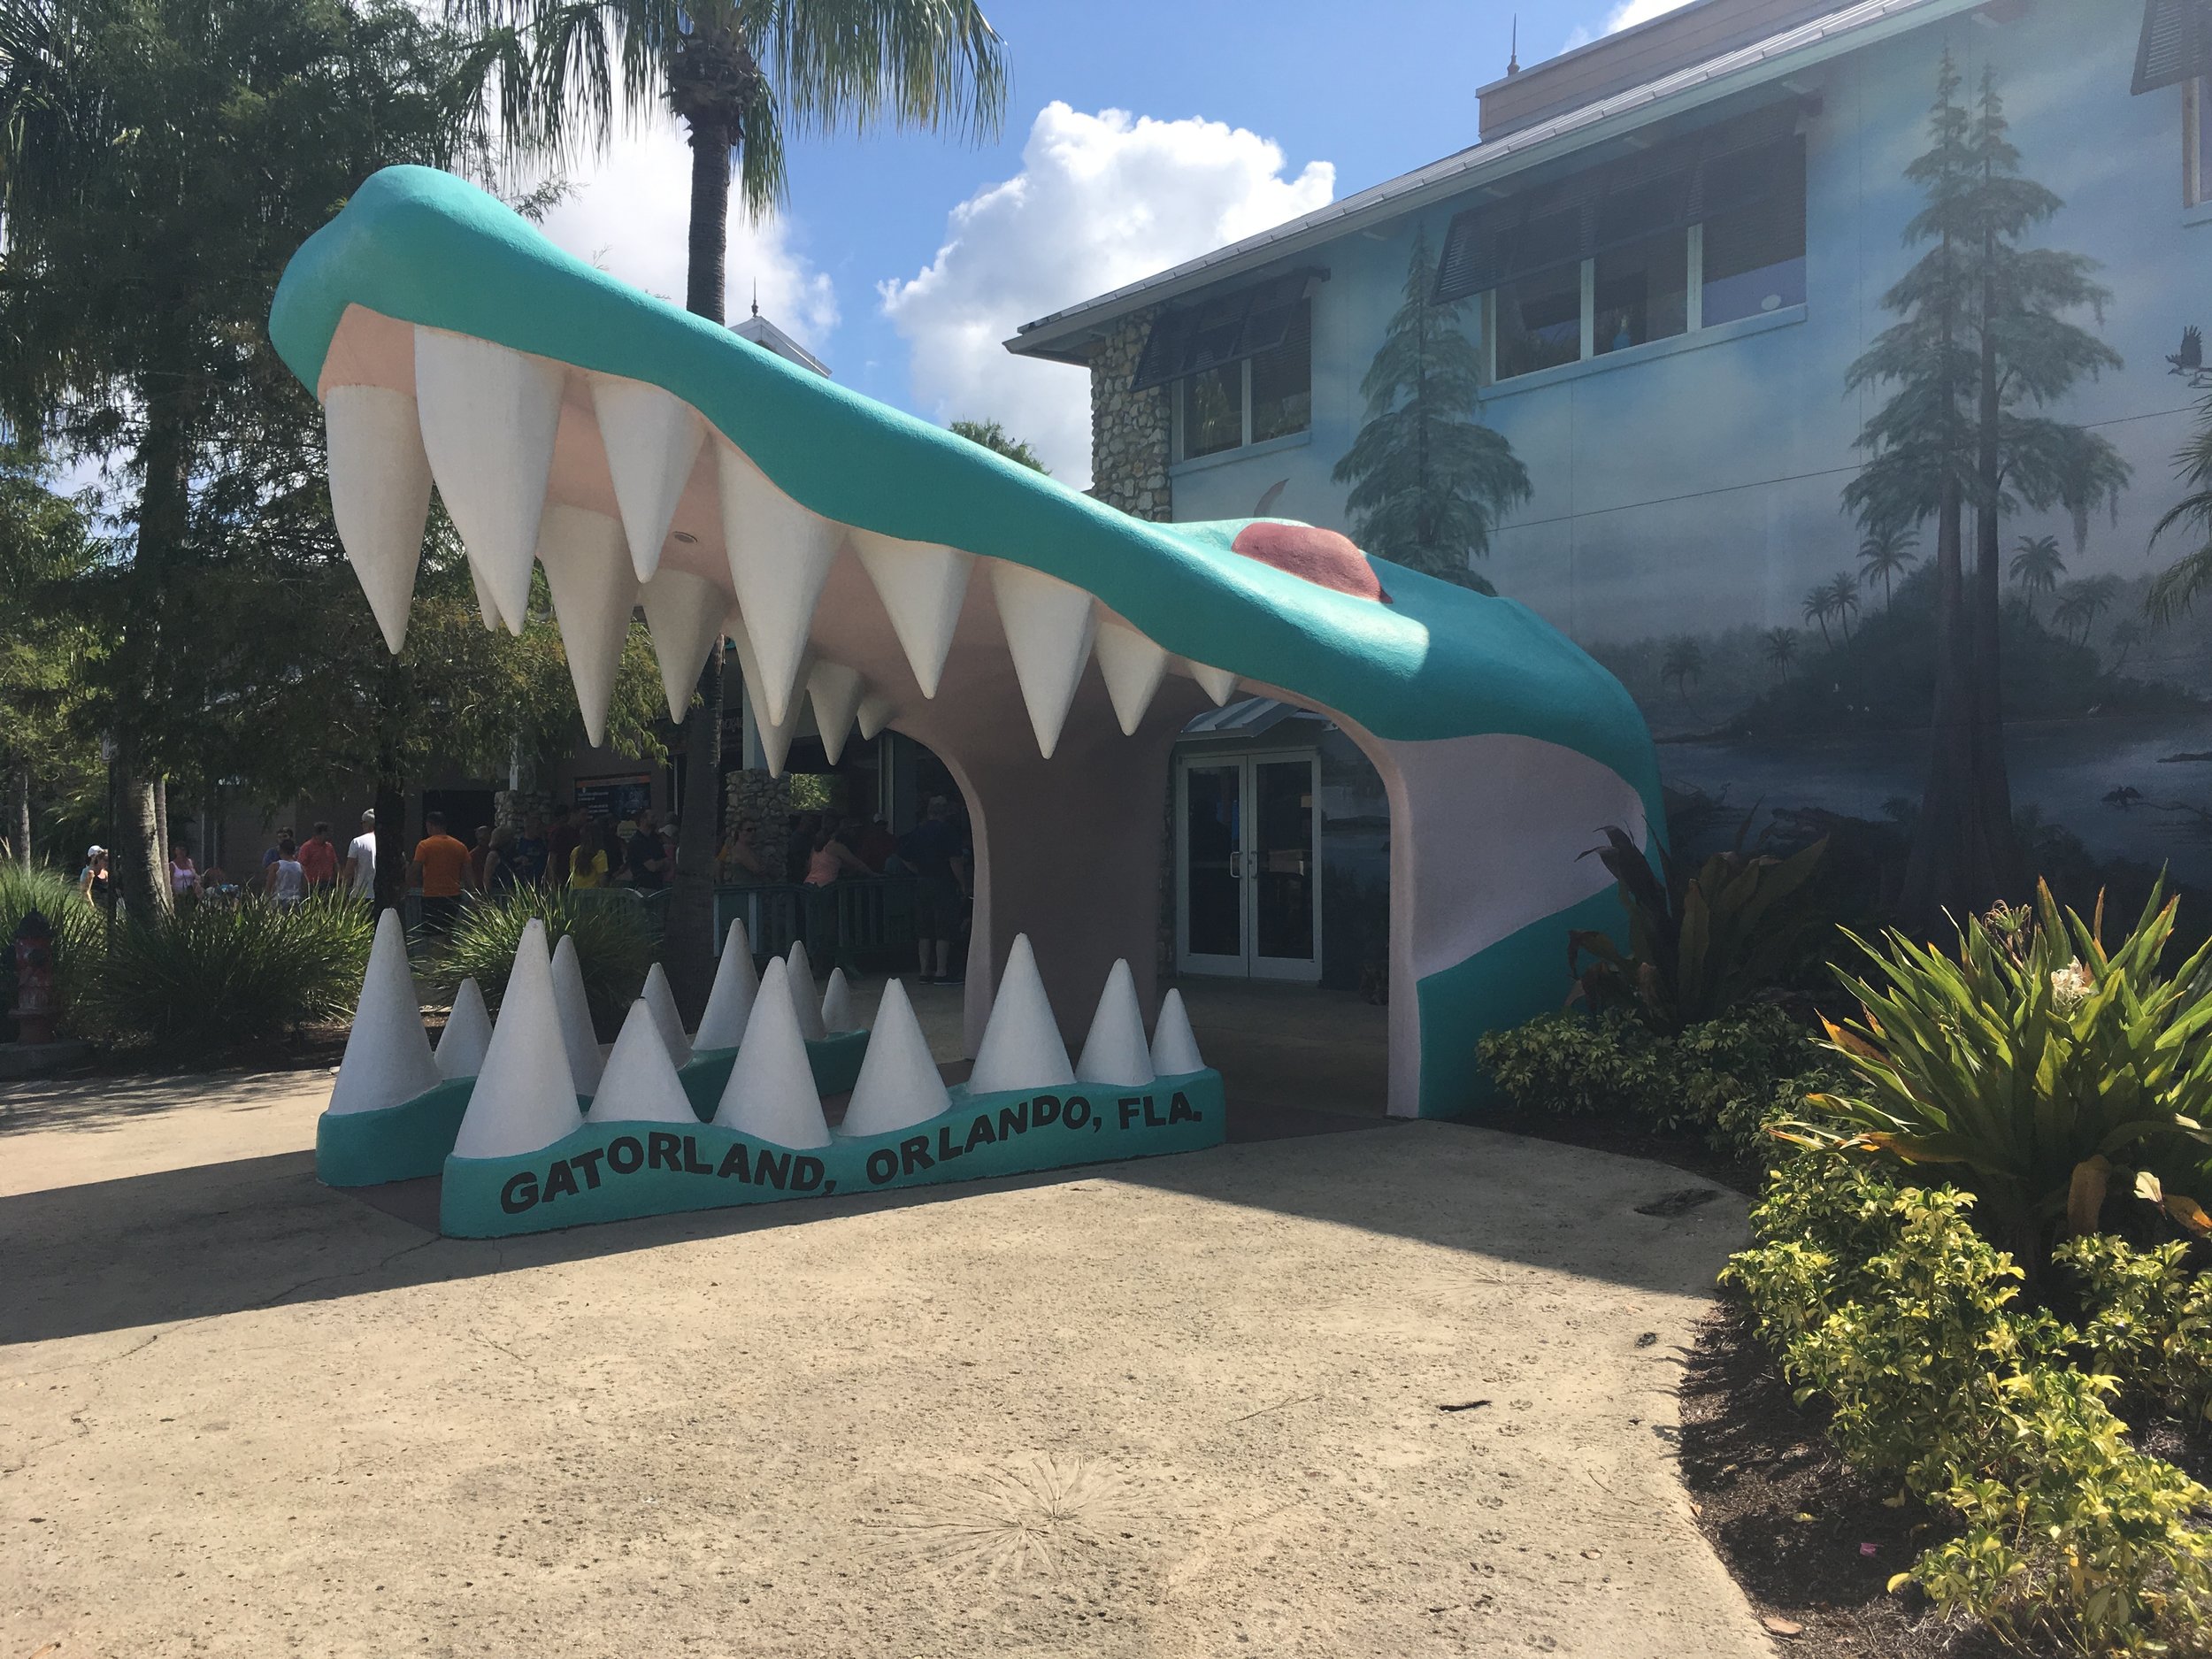  Gatorland - the must do's and must see's at Gatorland.  Gatorland is not just a zoo, but so much more.  You can go Ziplining over Gators, Feed the gators, and even Wrestle the gators. Check out why we would consider Gatorland to be a Bucket List Adventure! 